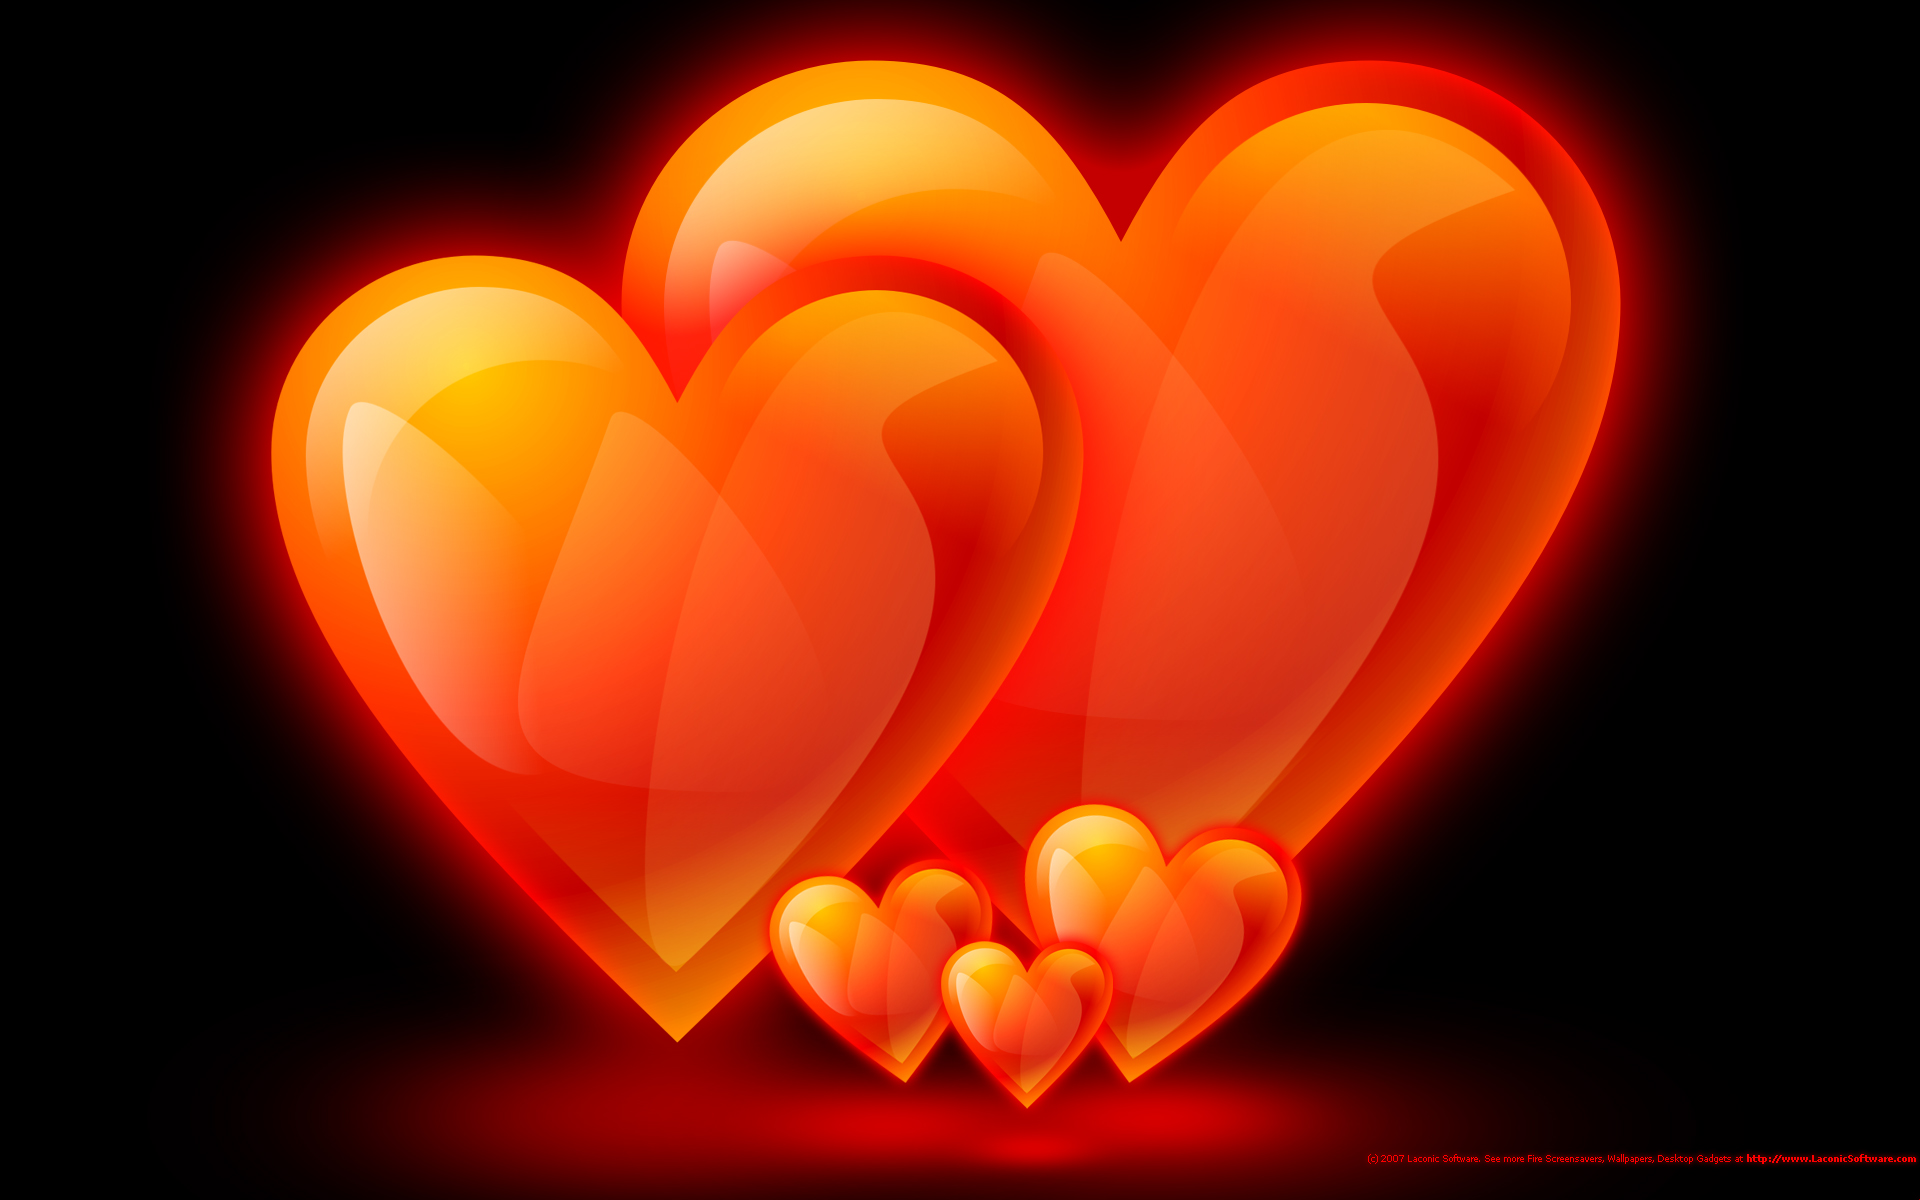  flame wallpaper hearts family wallpapers screensavers background 1920x1200